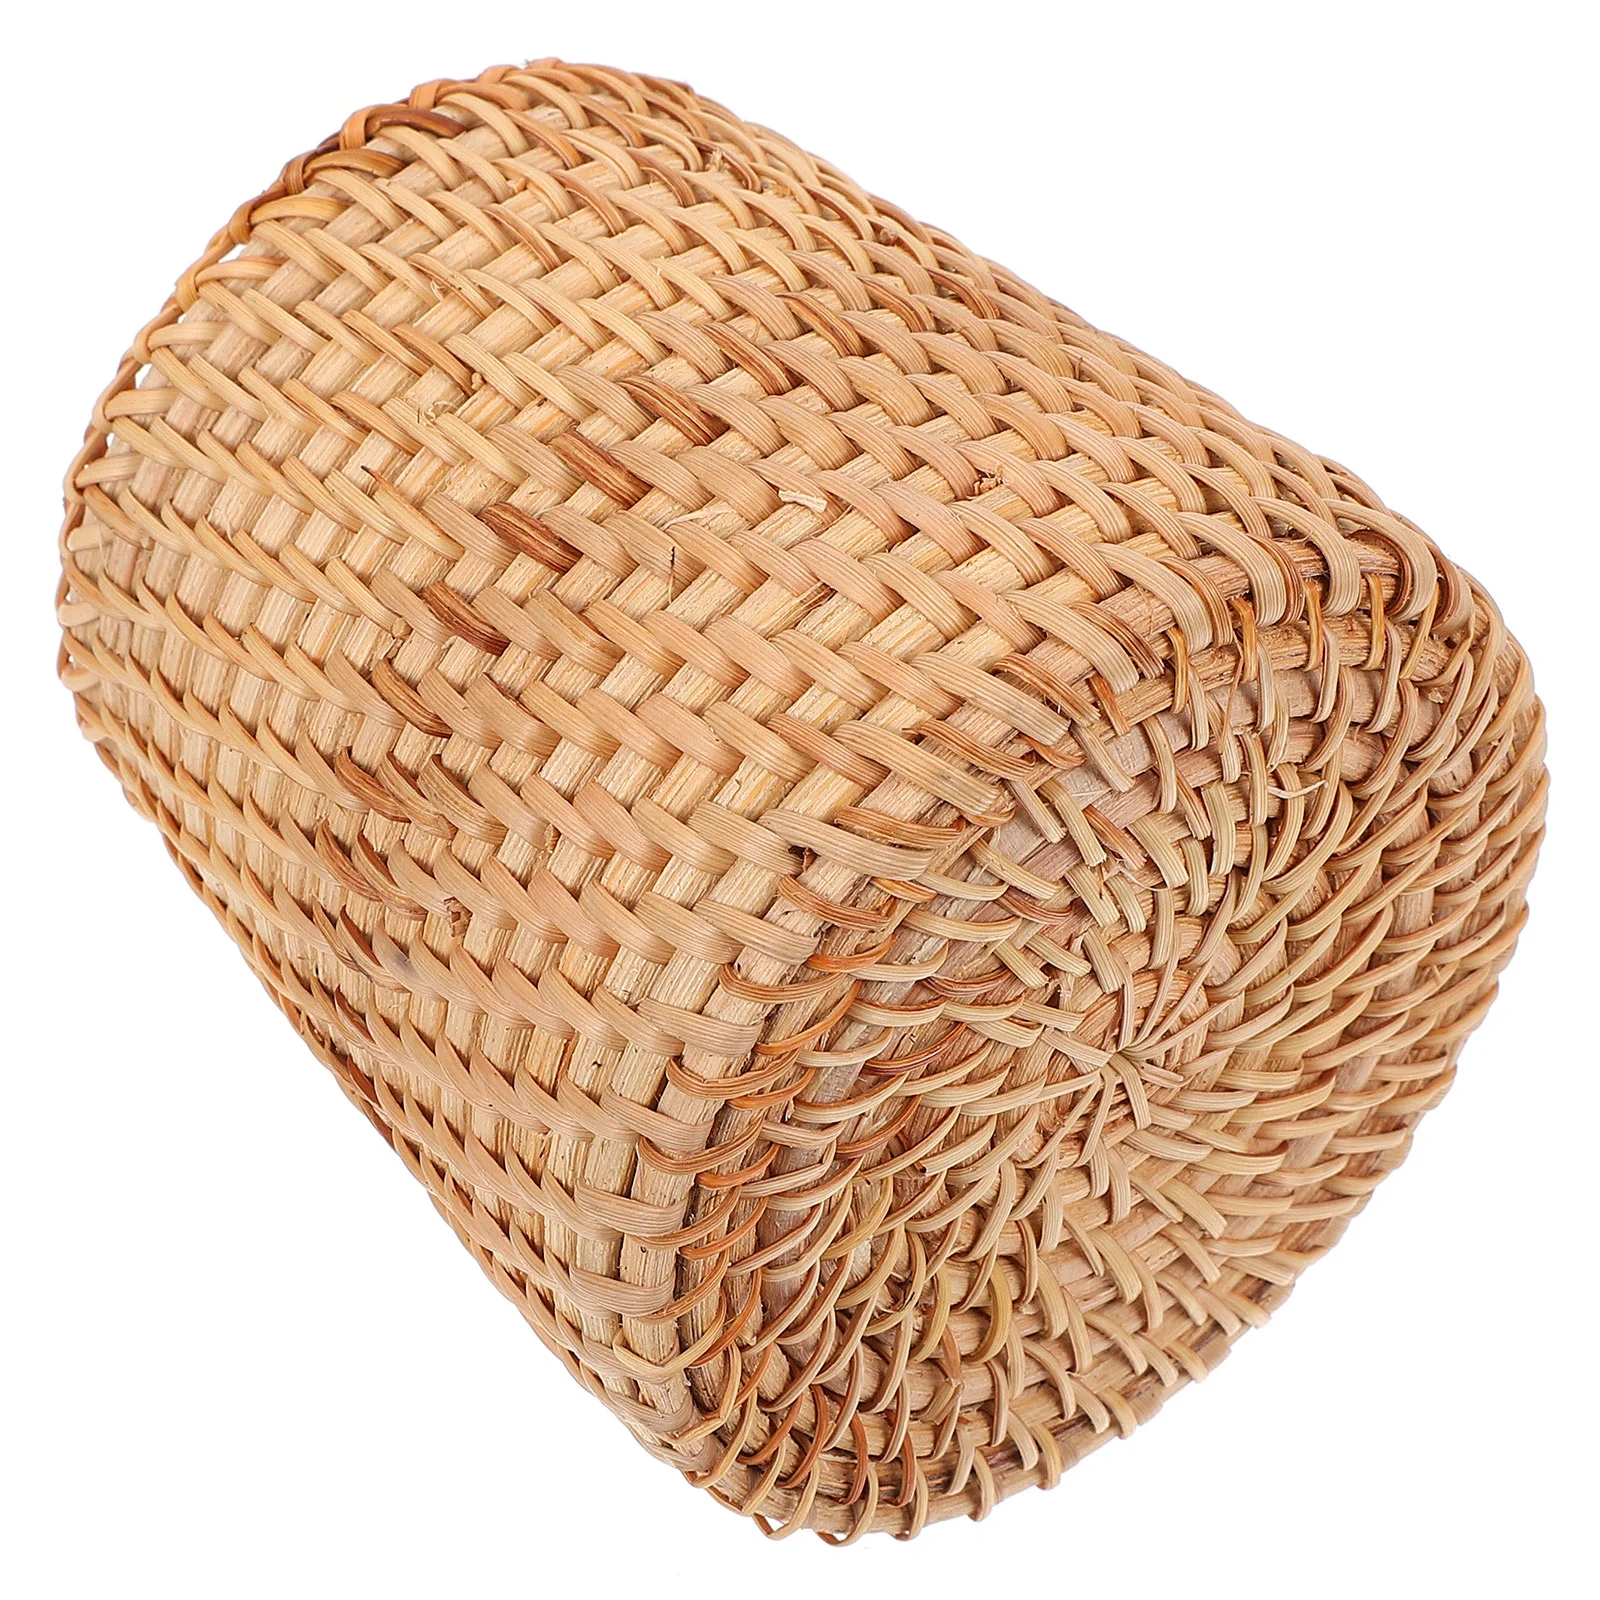 

Rattan Storage Tube Pen Holder Basket Container Stationary Round Plant Stand Wood Woven Home House Rack Accessory